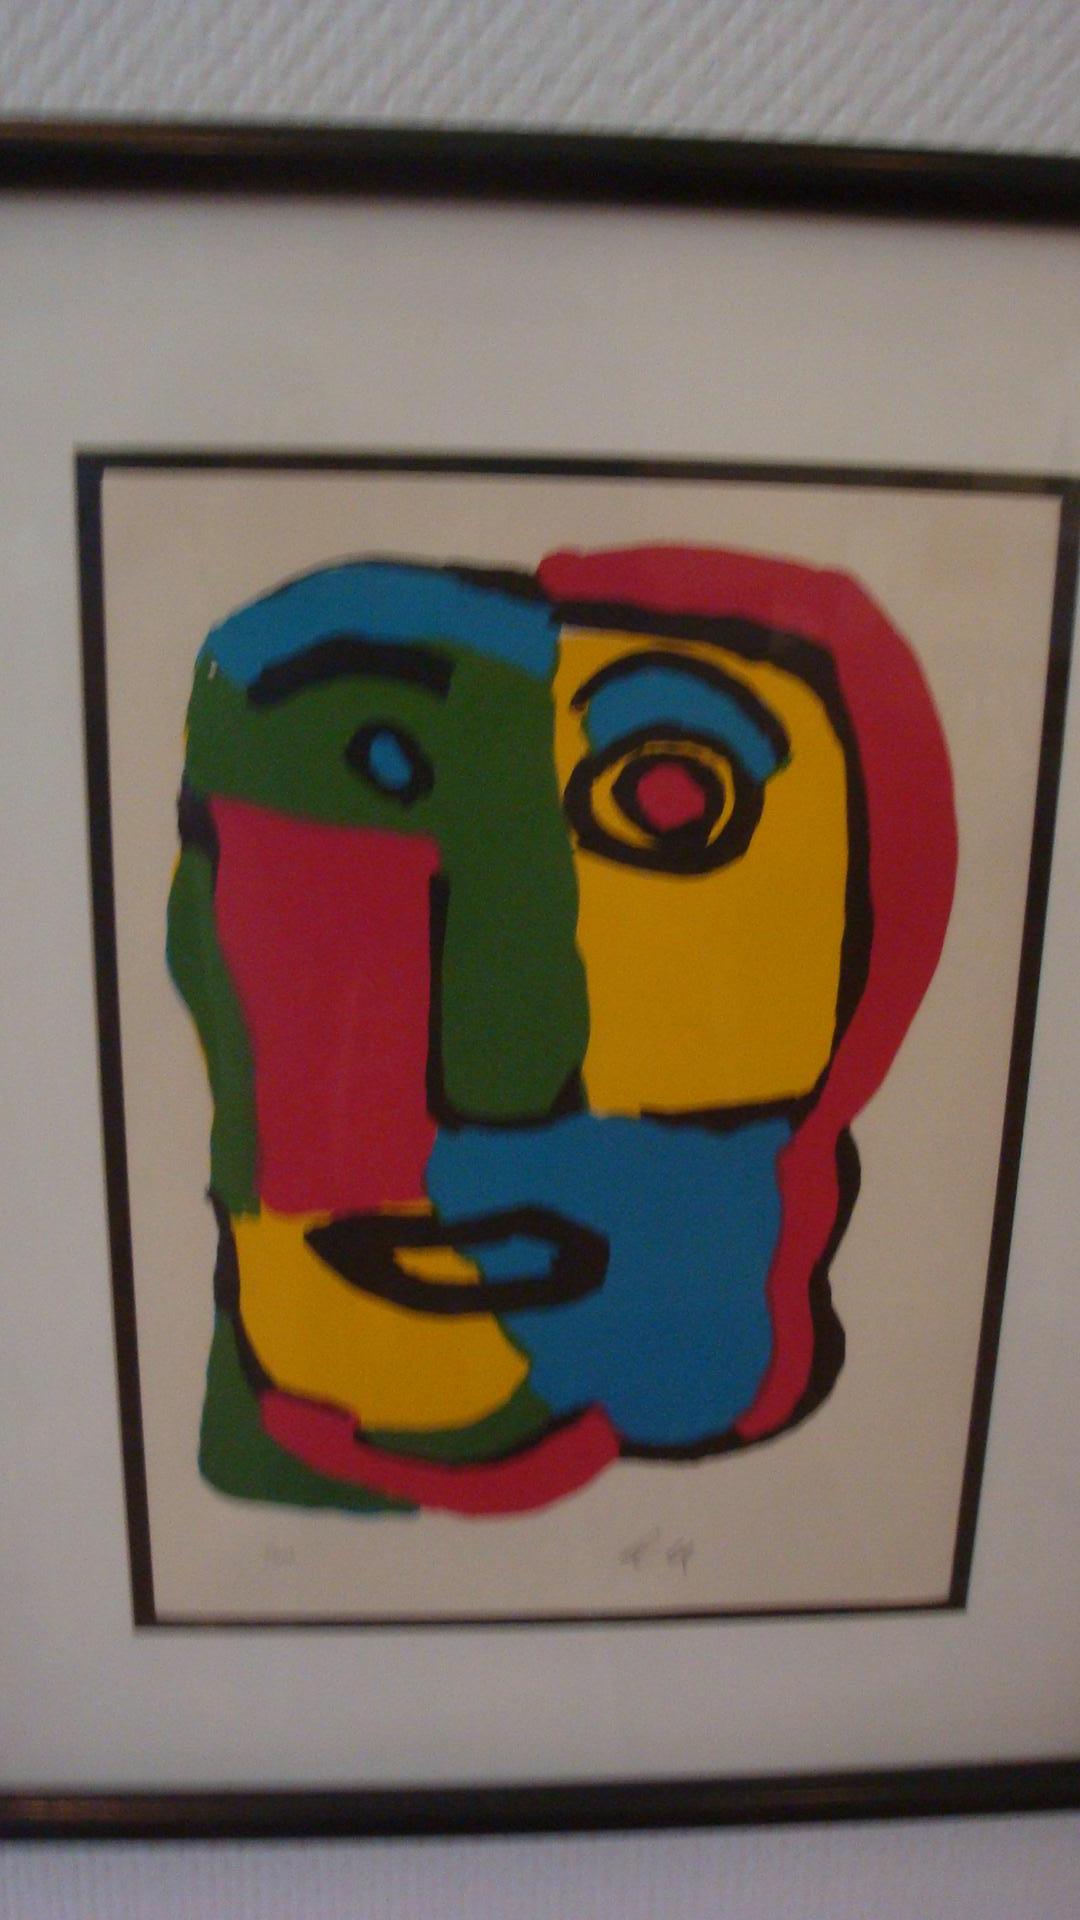 This is a colorful face lithograph done by Karel Appel in the 1970s.
 It is numbered 1/300 and signed with the initials K A.